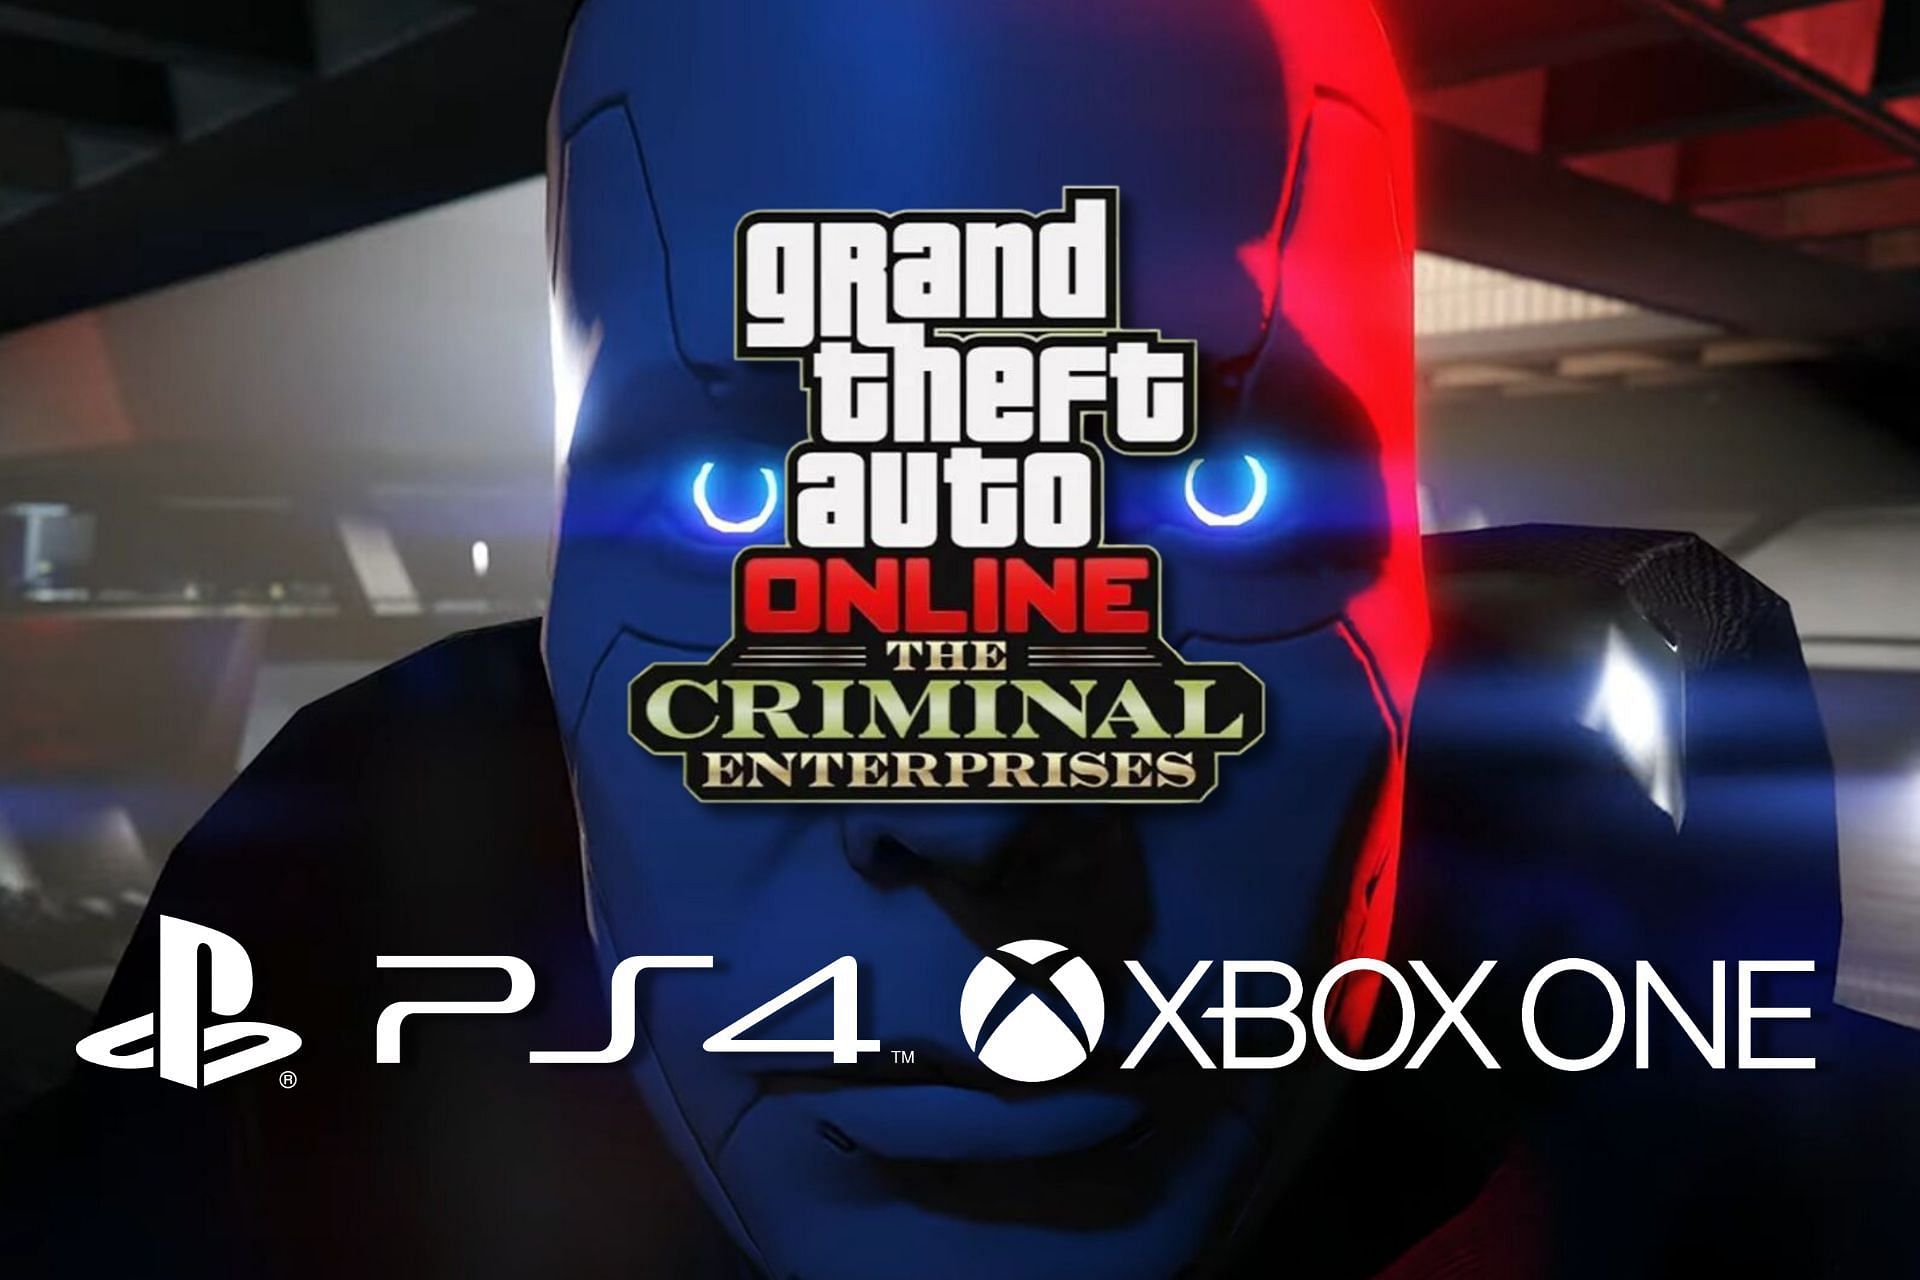 PS4 and Xbox One players face problems after the recent DLC update in GTA Online (Images via Sportskeeda)